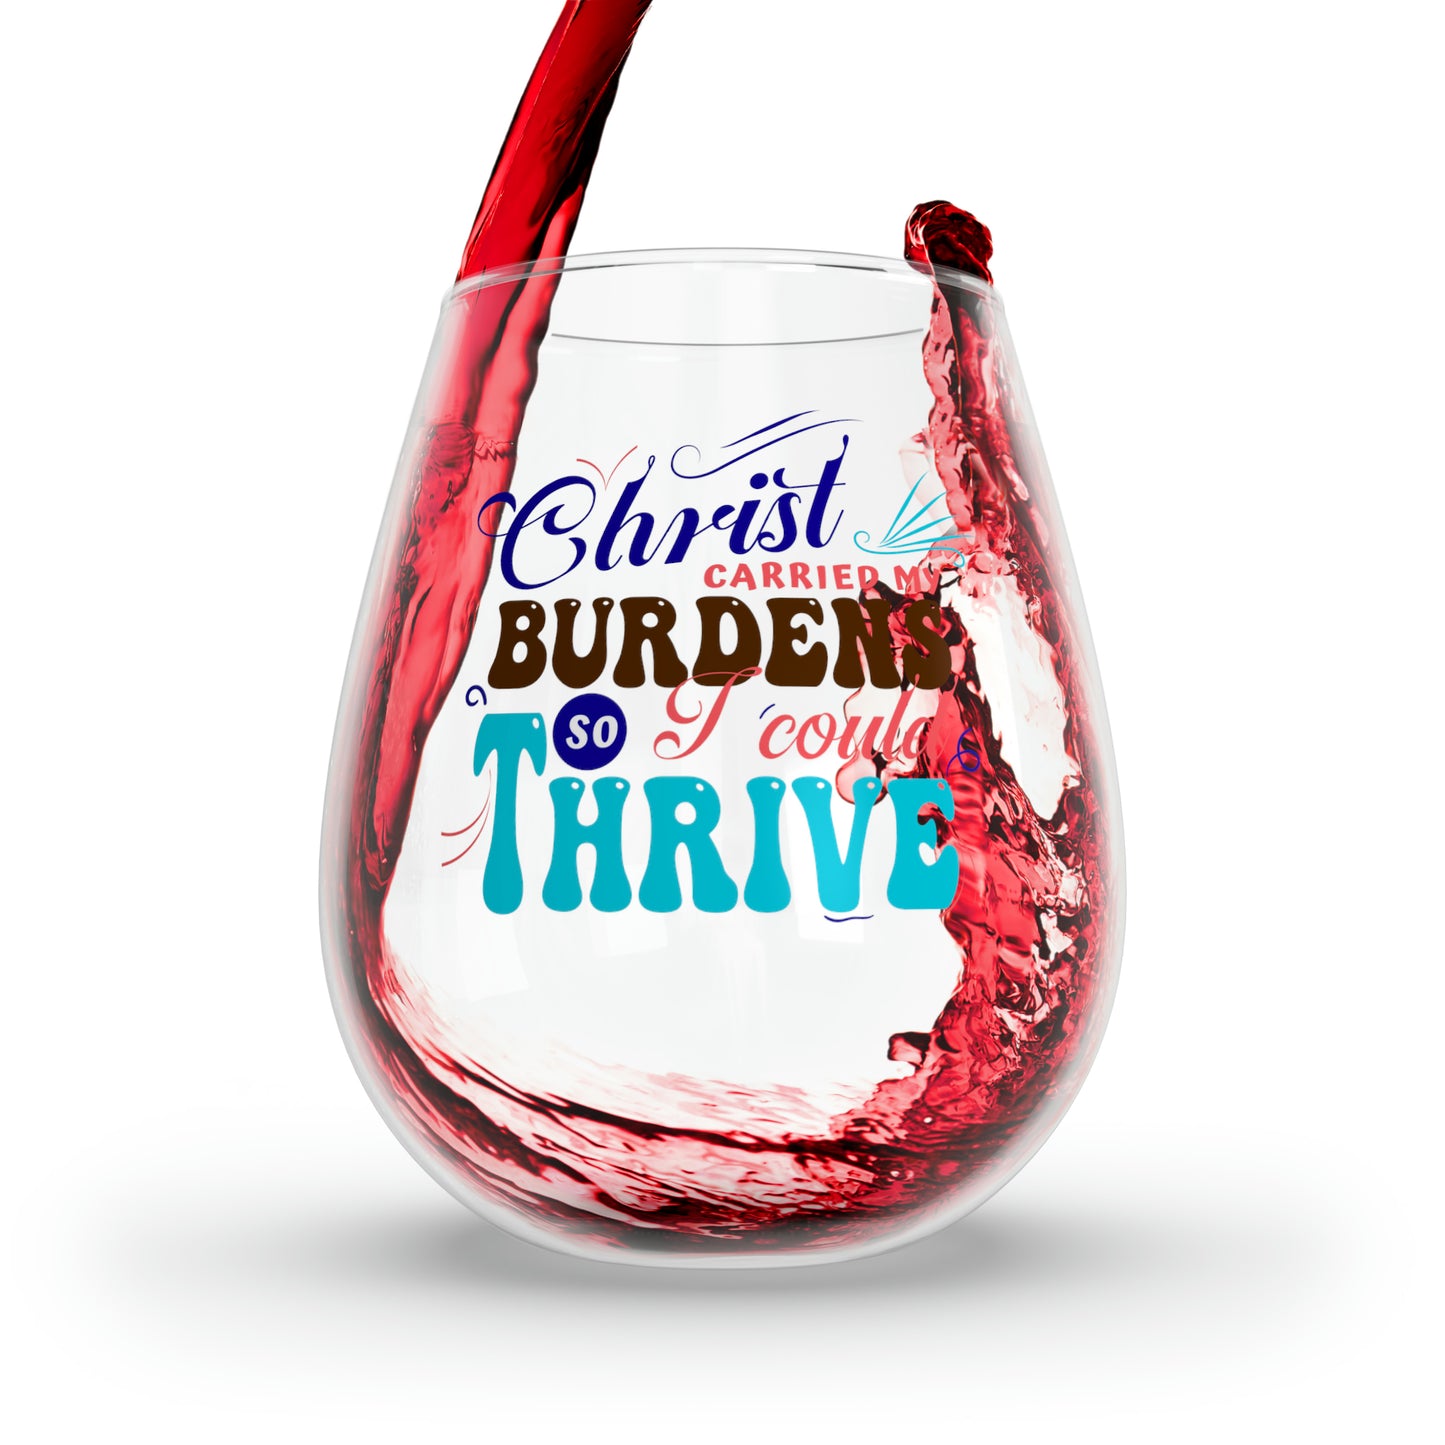 Christ Carried My Burdens So I Could Thrive Stemless Wine Glass, 11.75oz